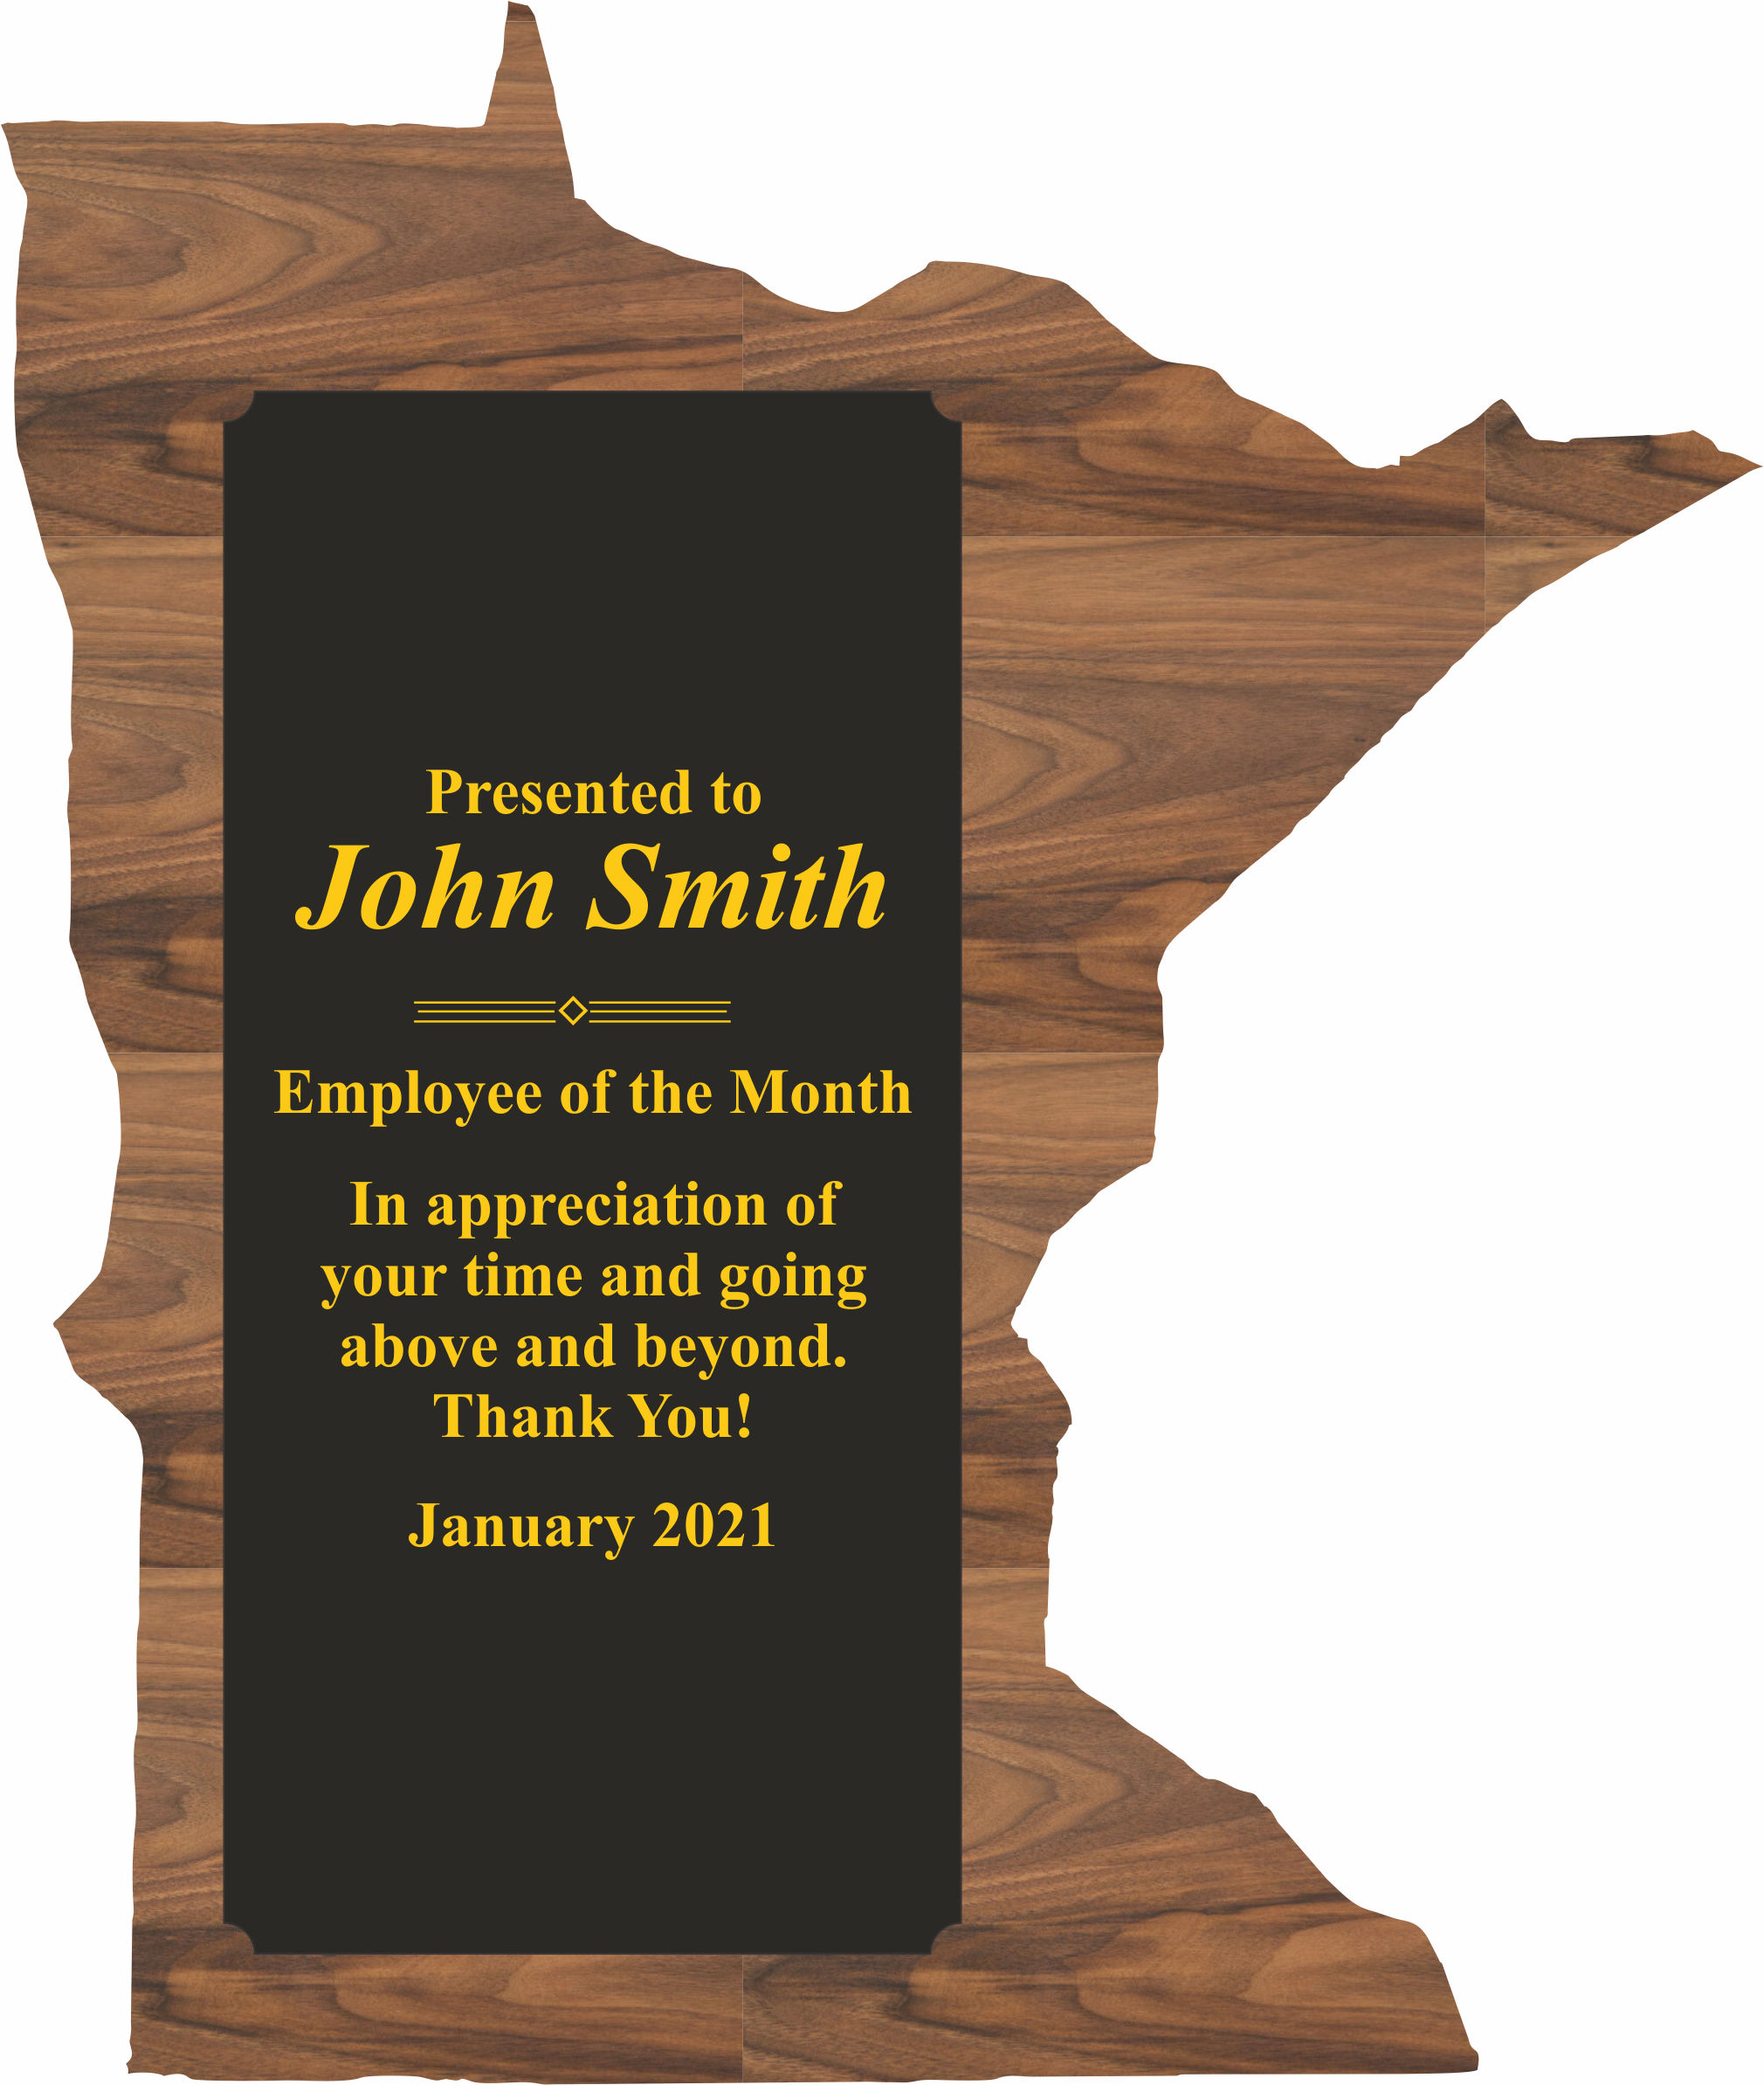 Minnesota State Shaped Plaques, Custom Engraved With Your Logo!